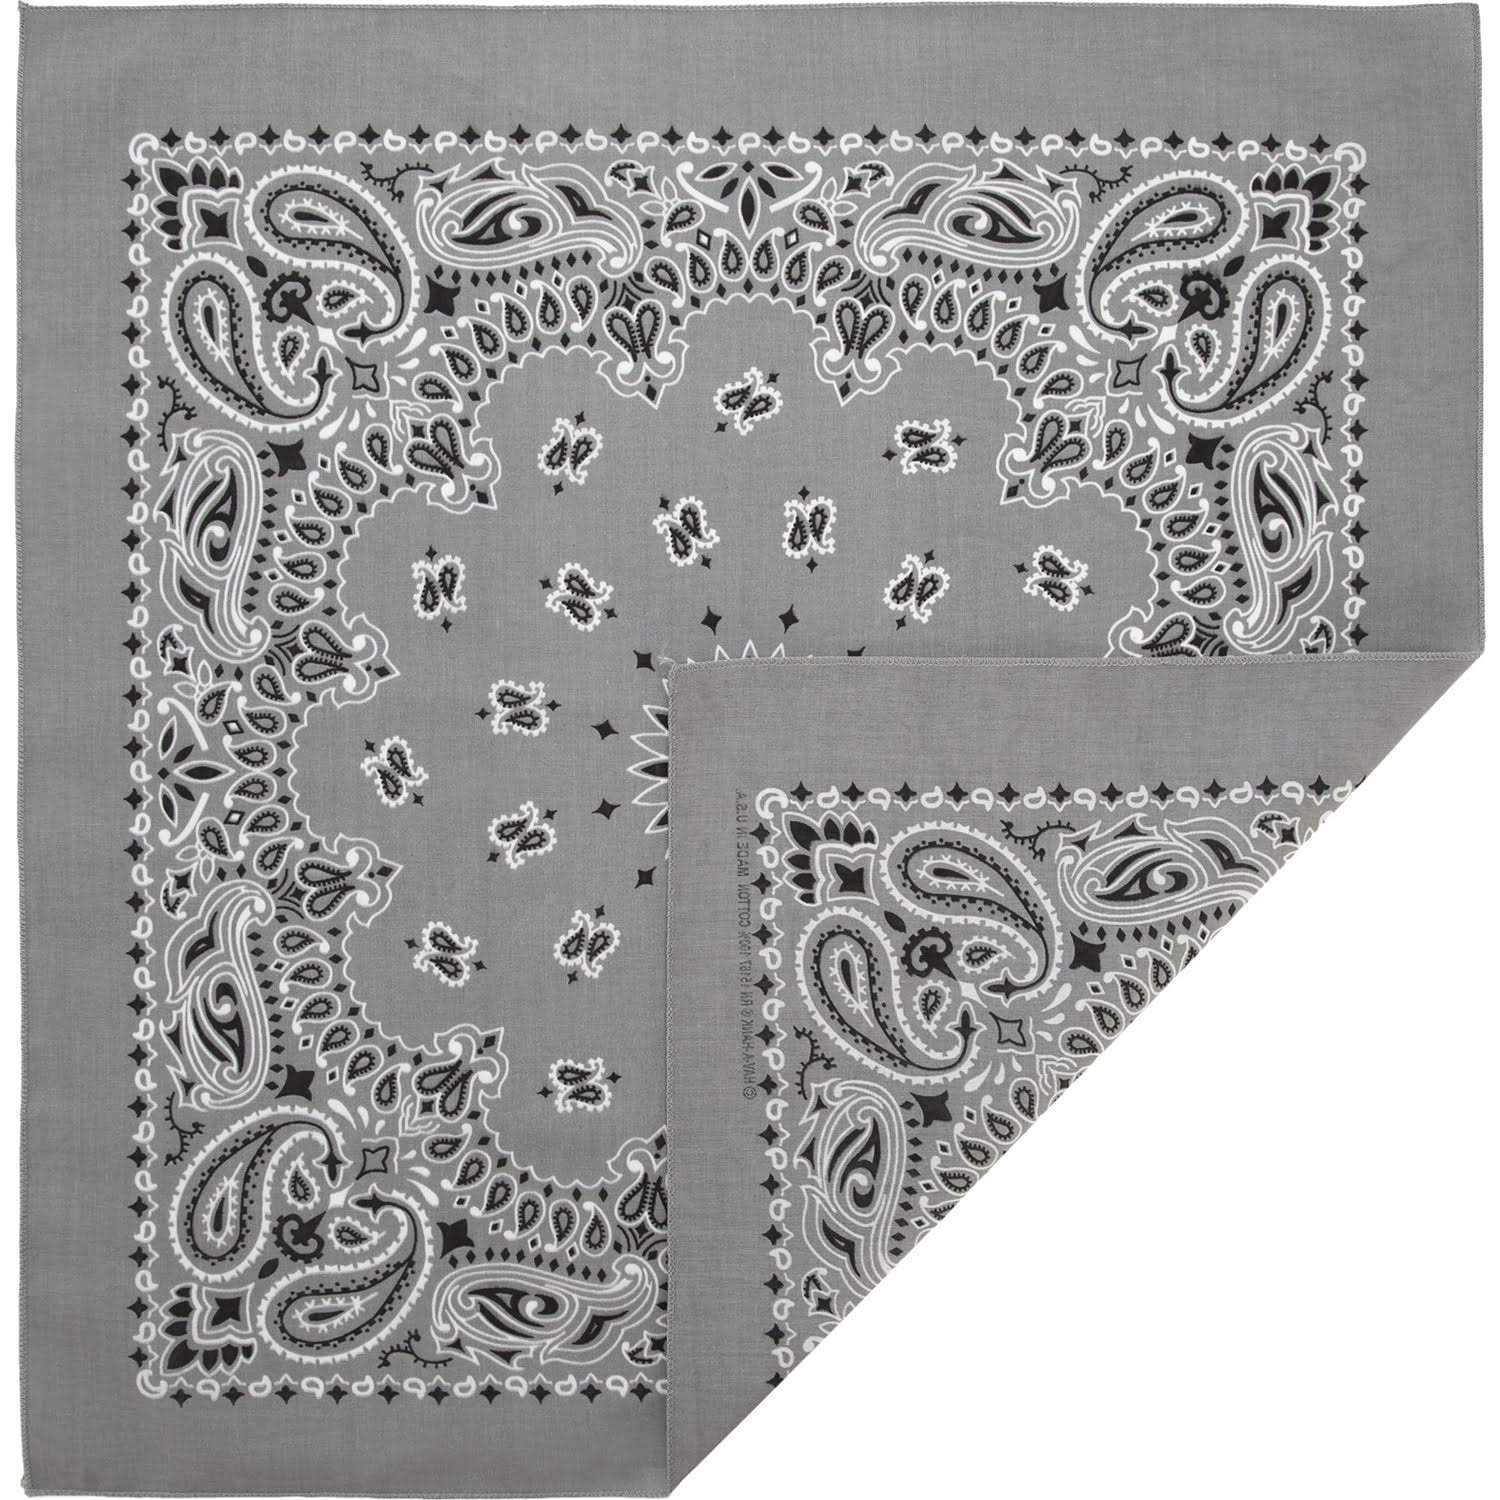 12pcs American Made Silver Western Paisley Bandanas - Dozen Packed - 100% Cotton - 22x22 Inches